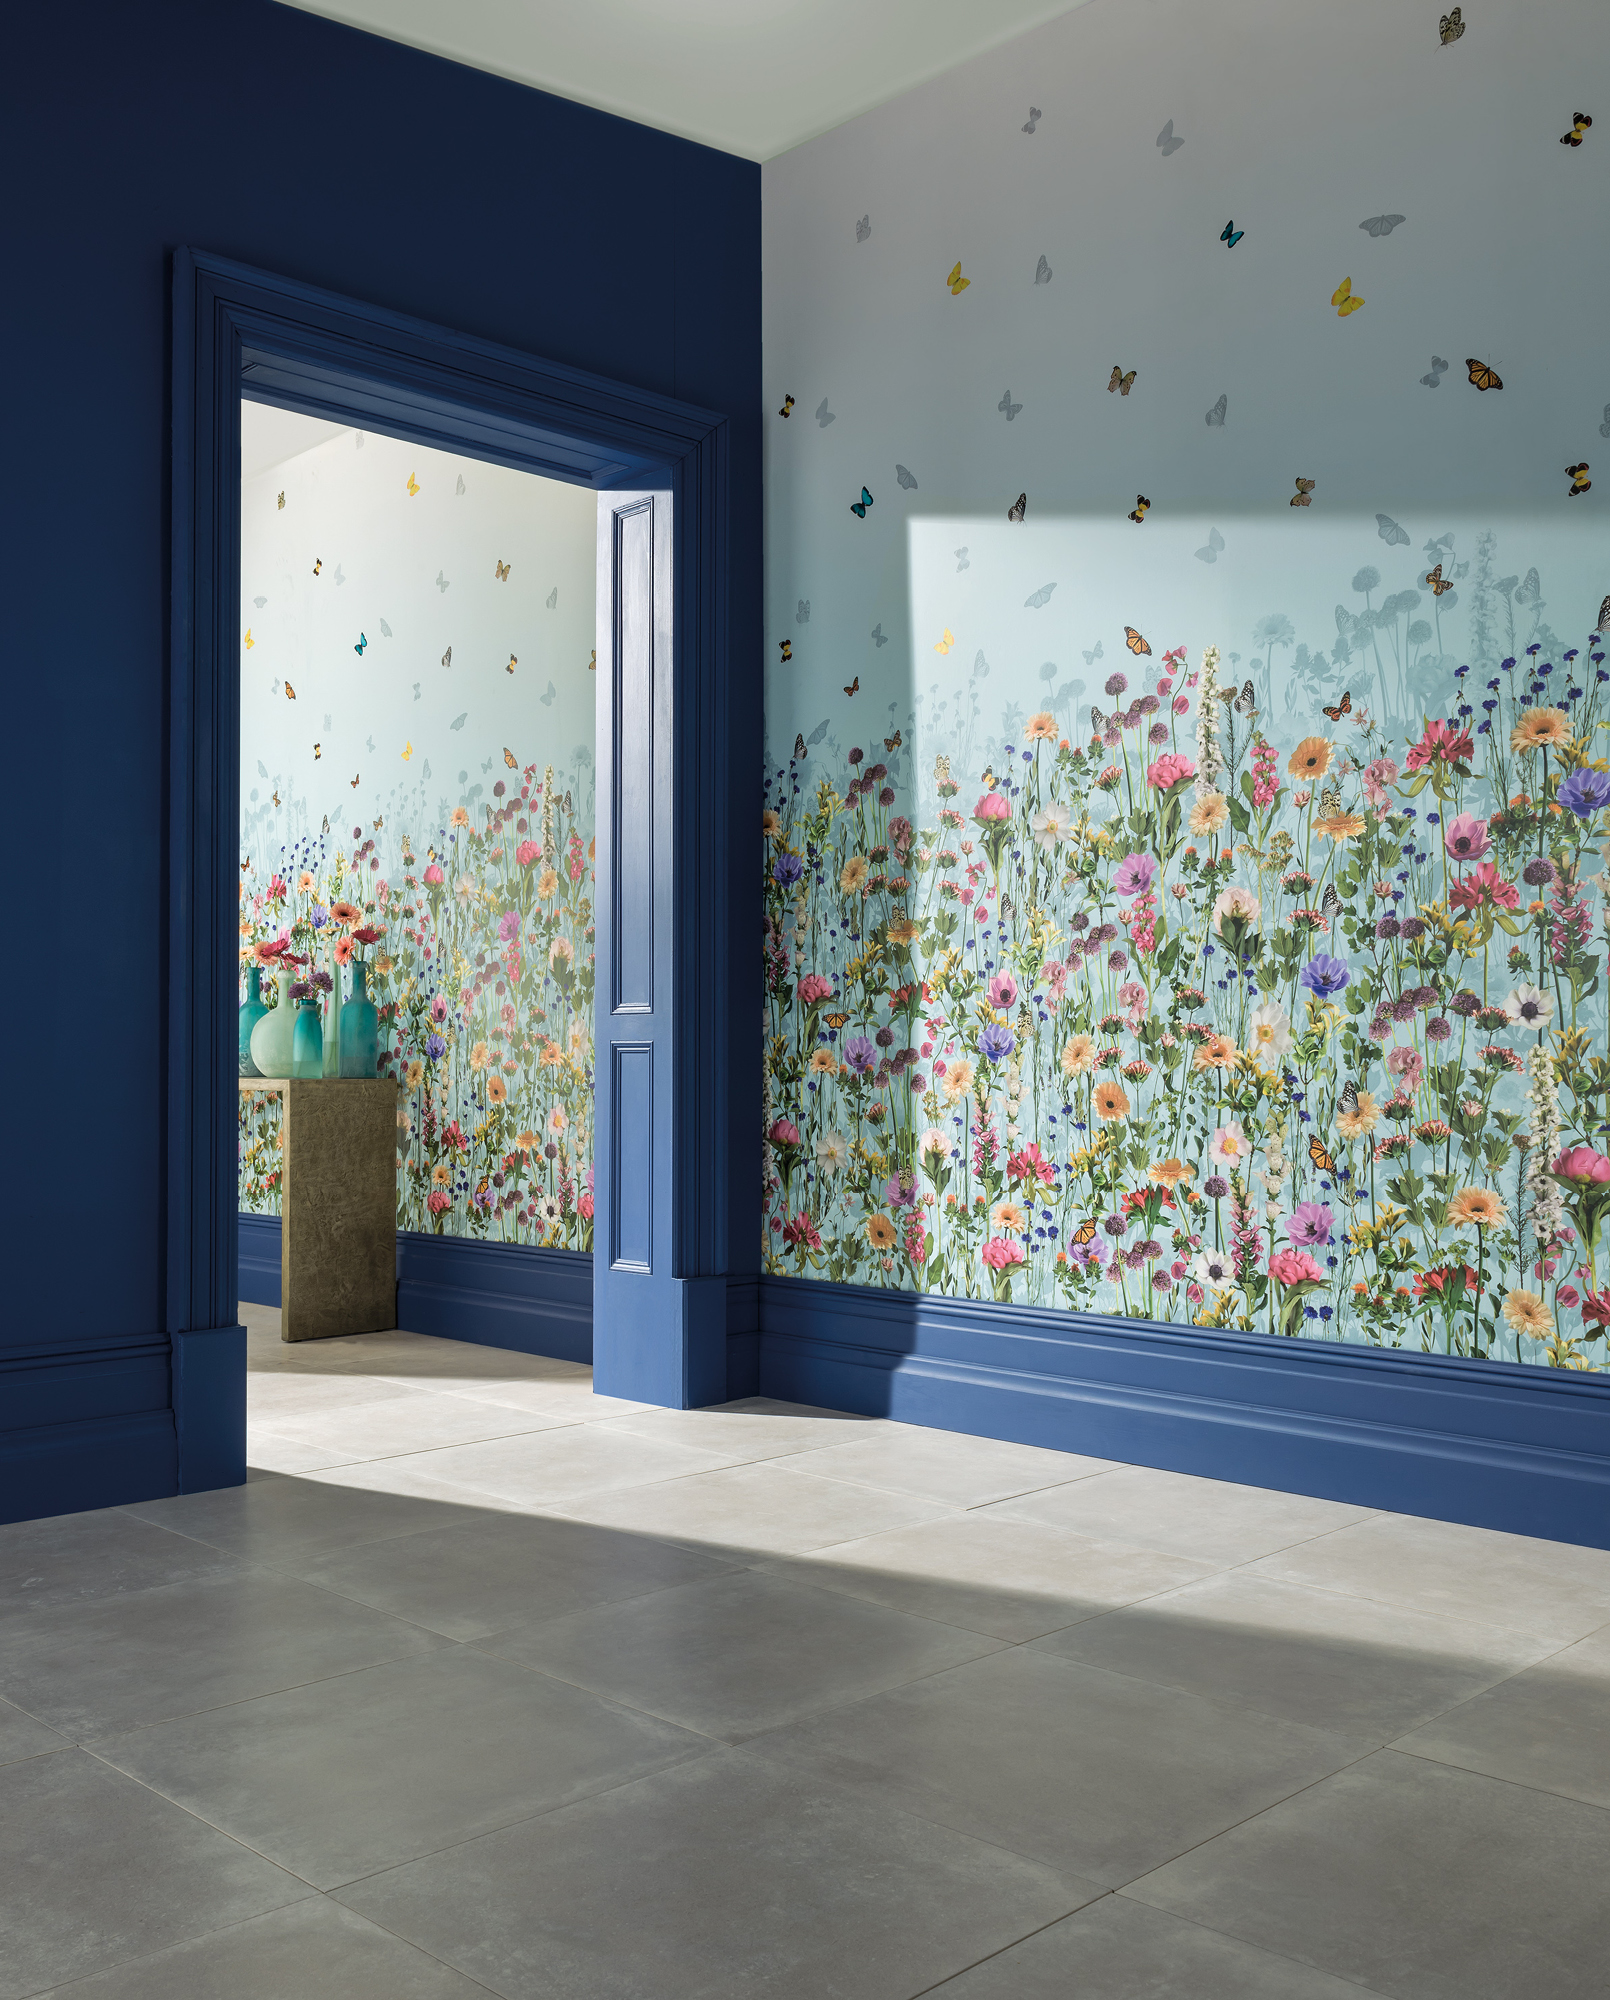 Matthew Williamson has collaborated with Osborne & Little on bold floral and nature-inspired prints in the Belvoir wallpaper collection.